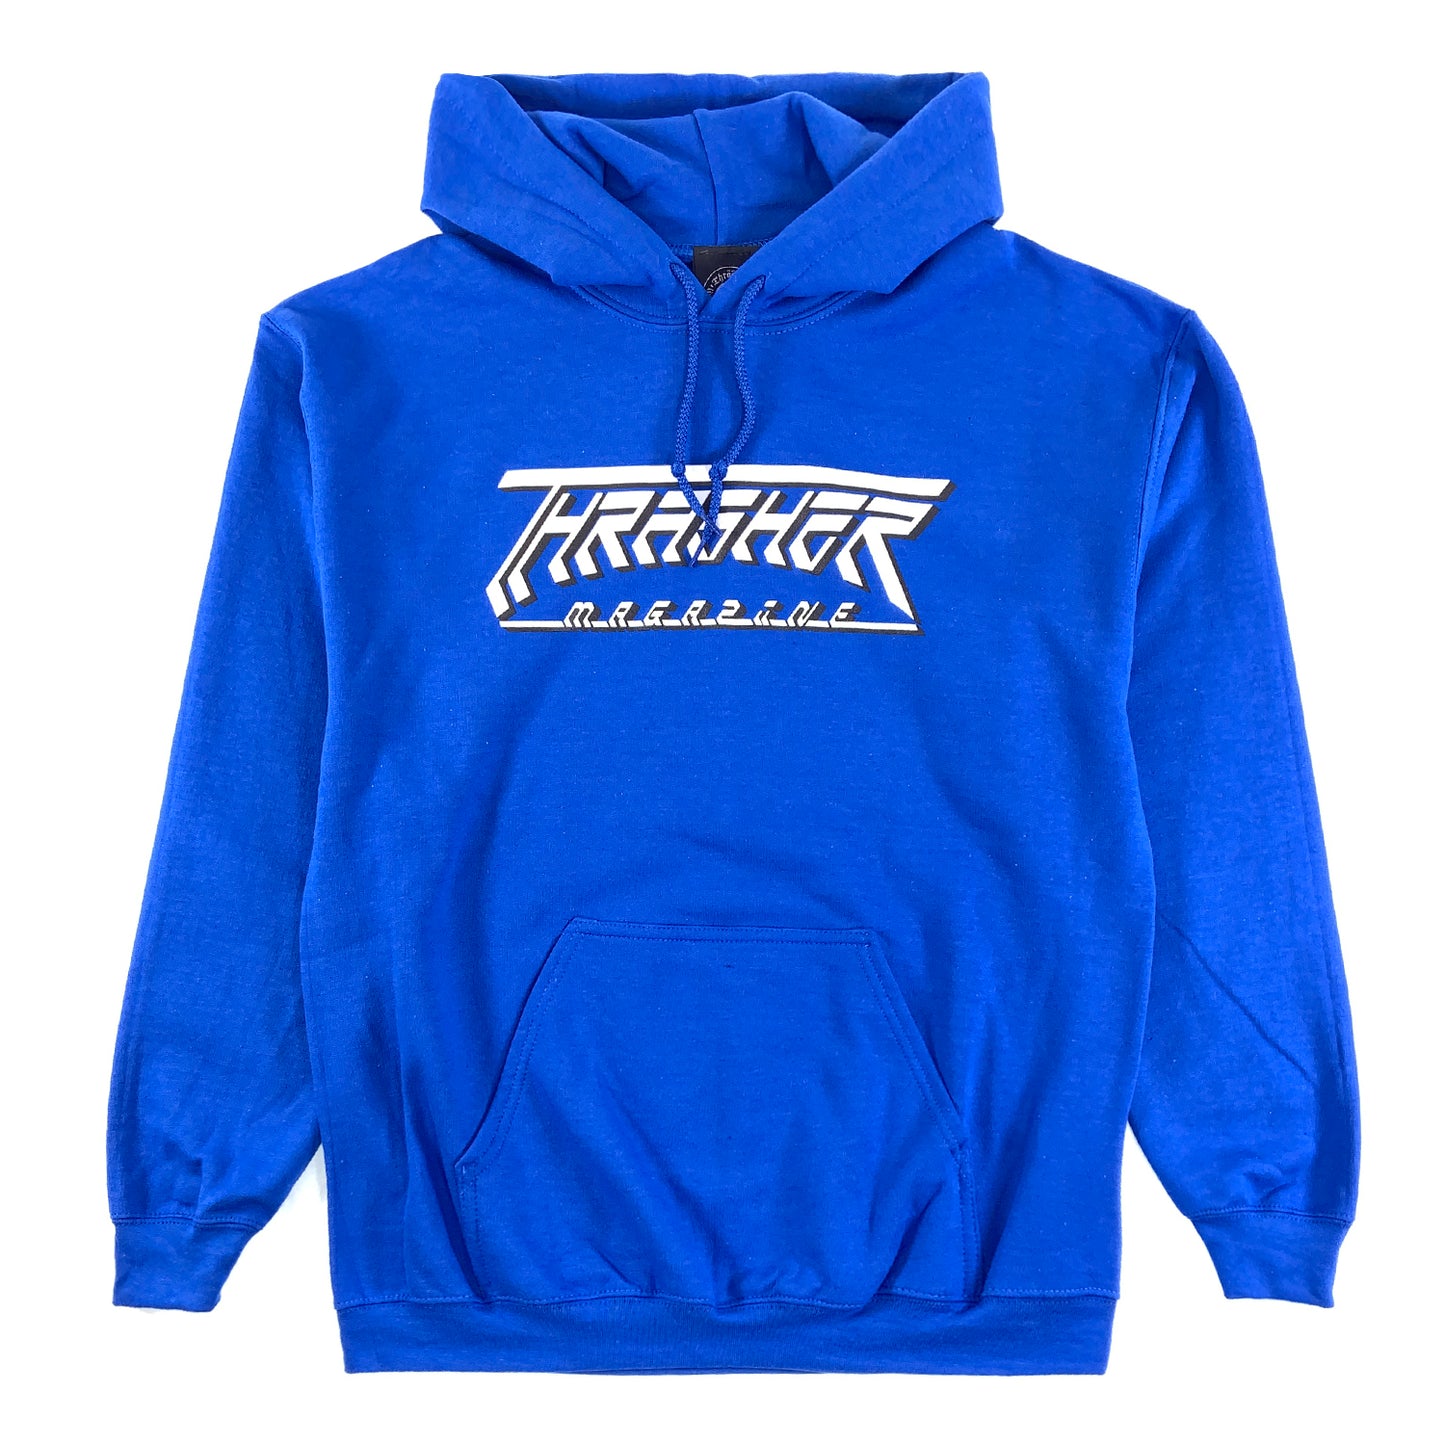 Thrasher - Future Logo - Hooded Sweat - Royal Blue - Prime Delux Store